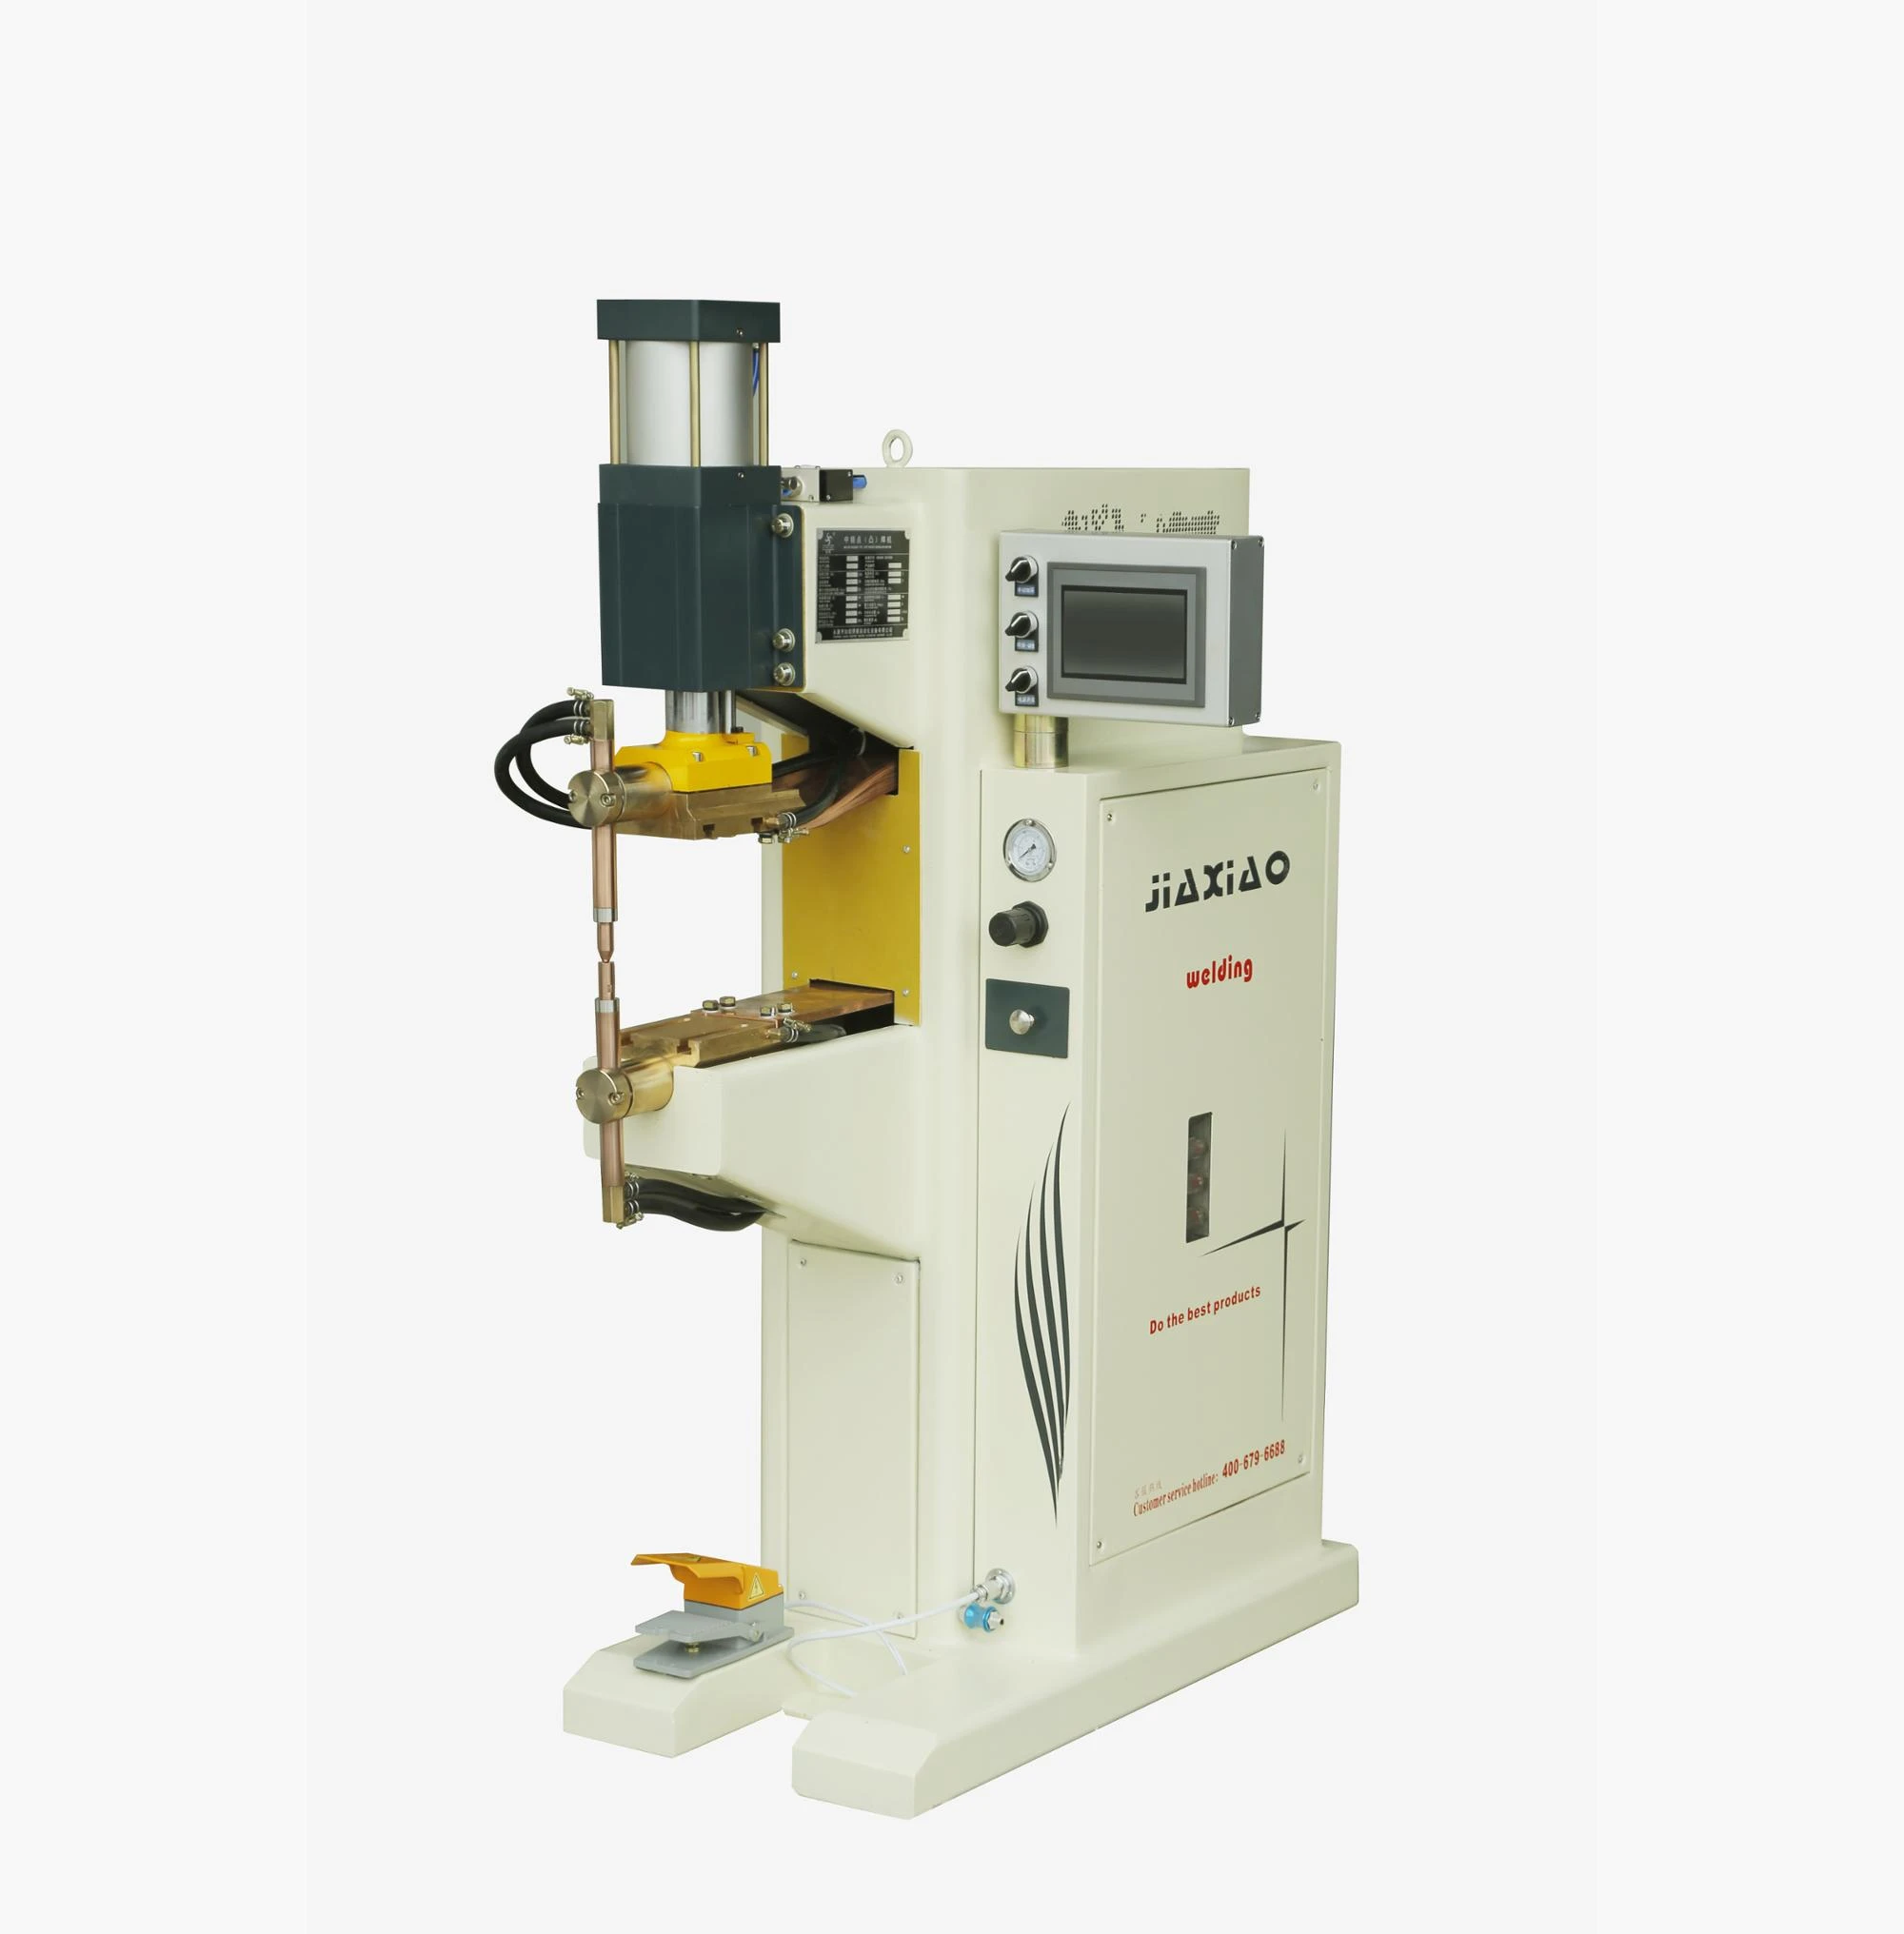 MFDC Spot Automatic Welding Machine , Relay Silver Contact Electric Welding Equipment